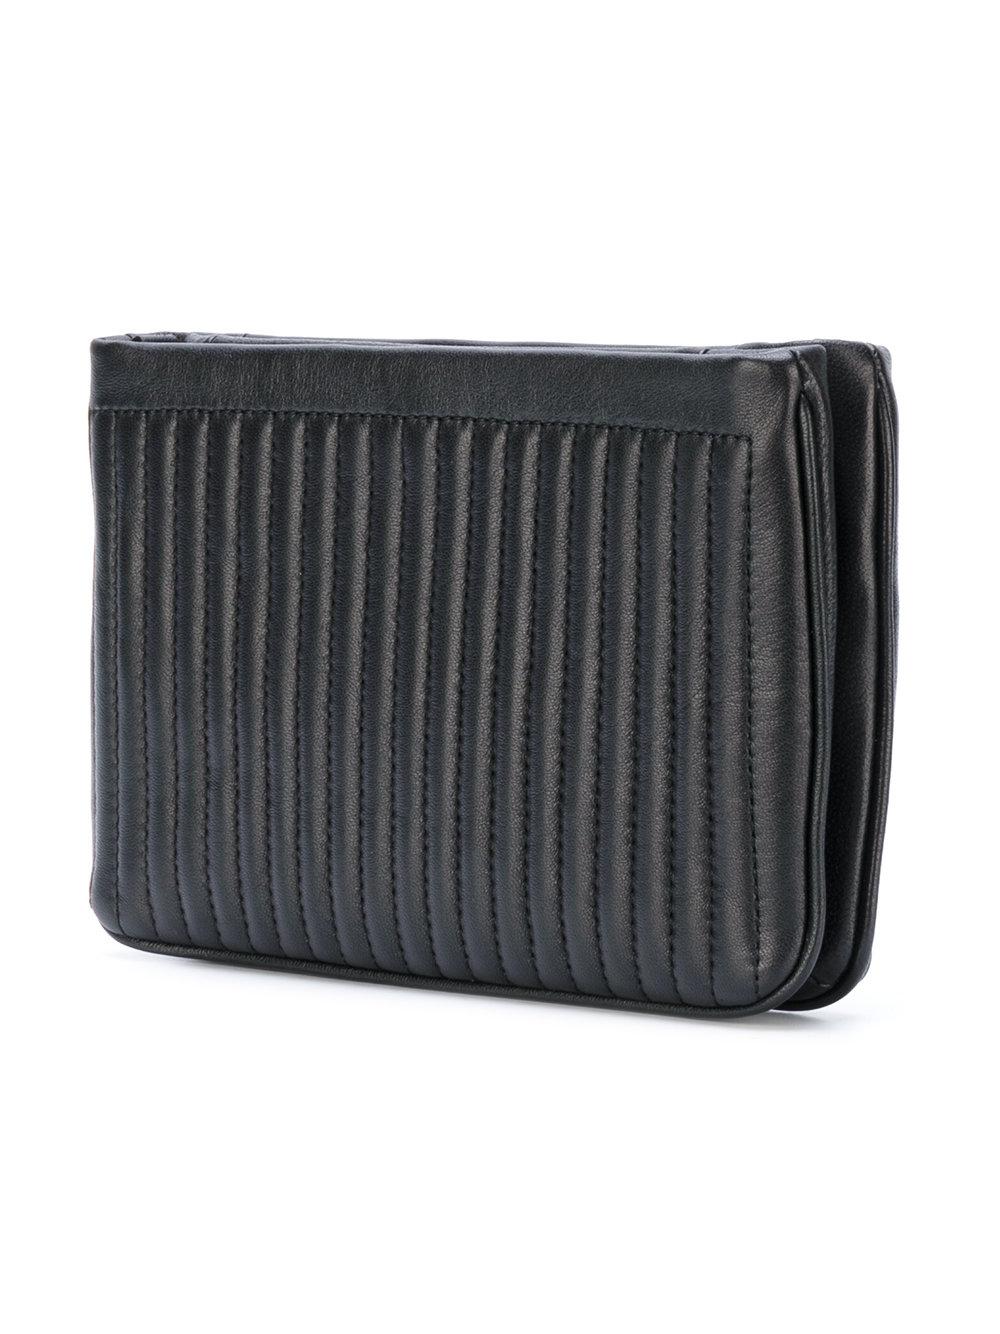 DKNY Leather Quilted Pinstripe Crossbody Bag in Black - Lyst